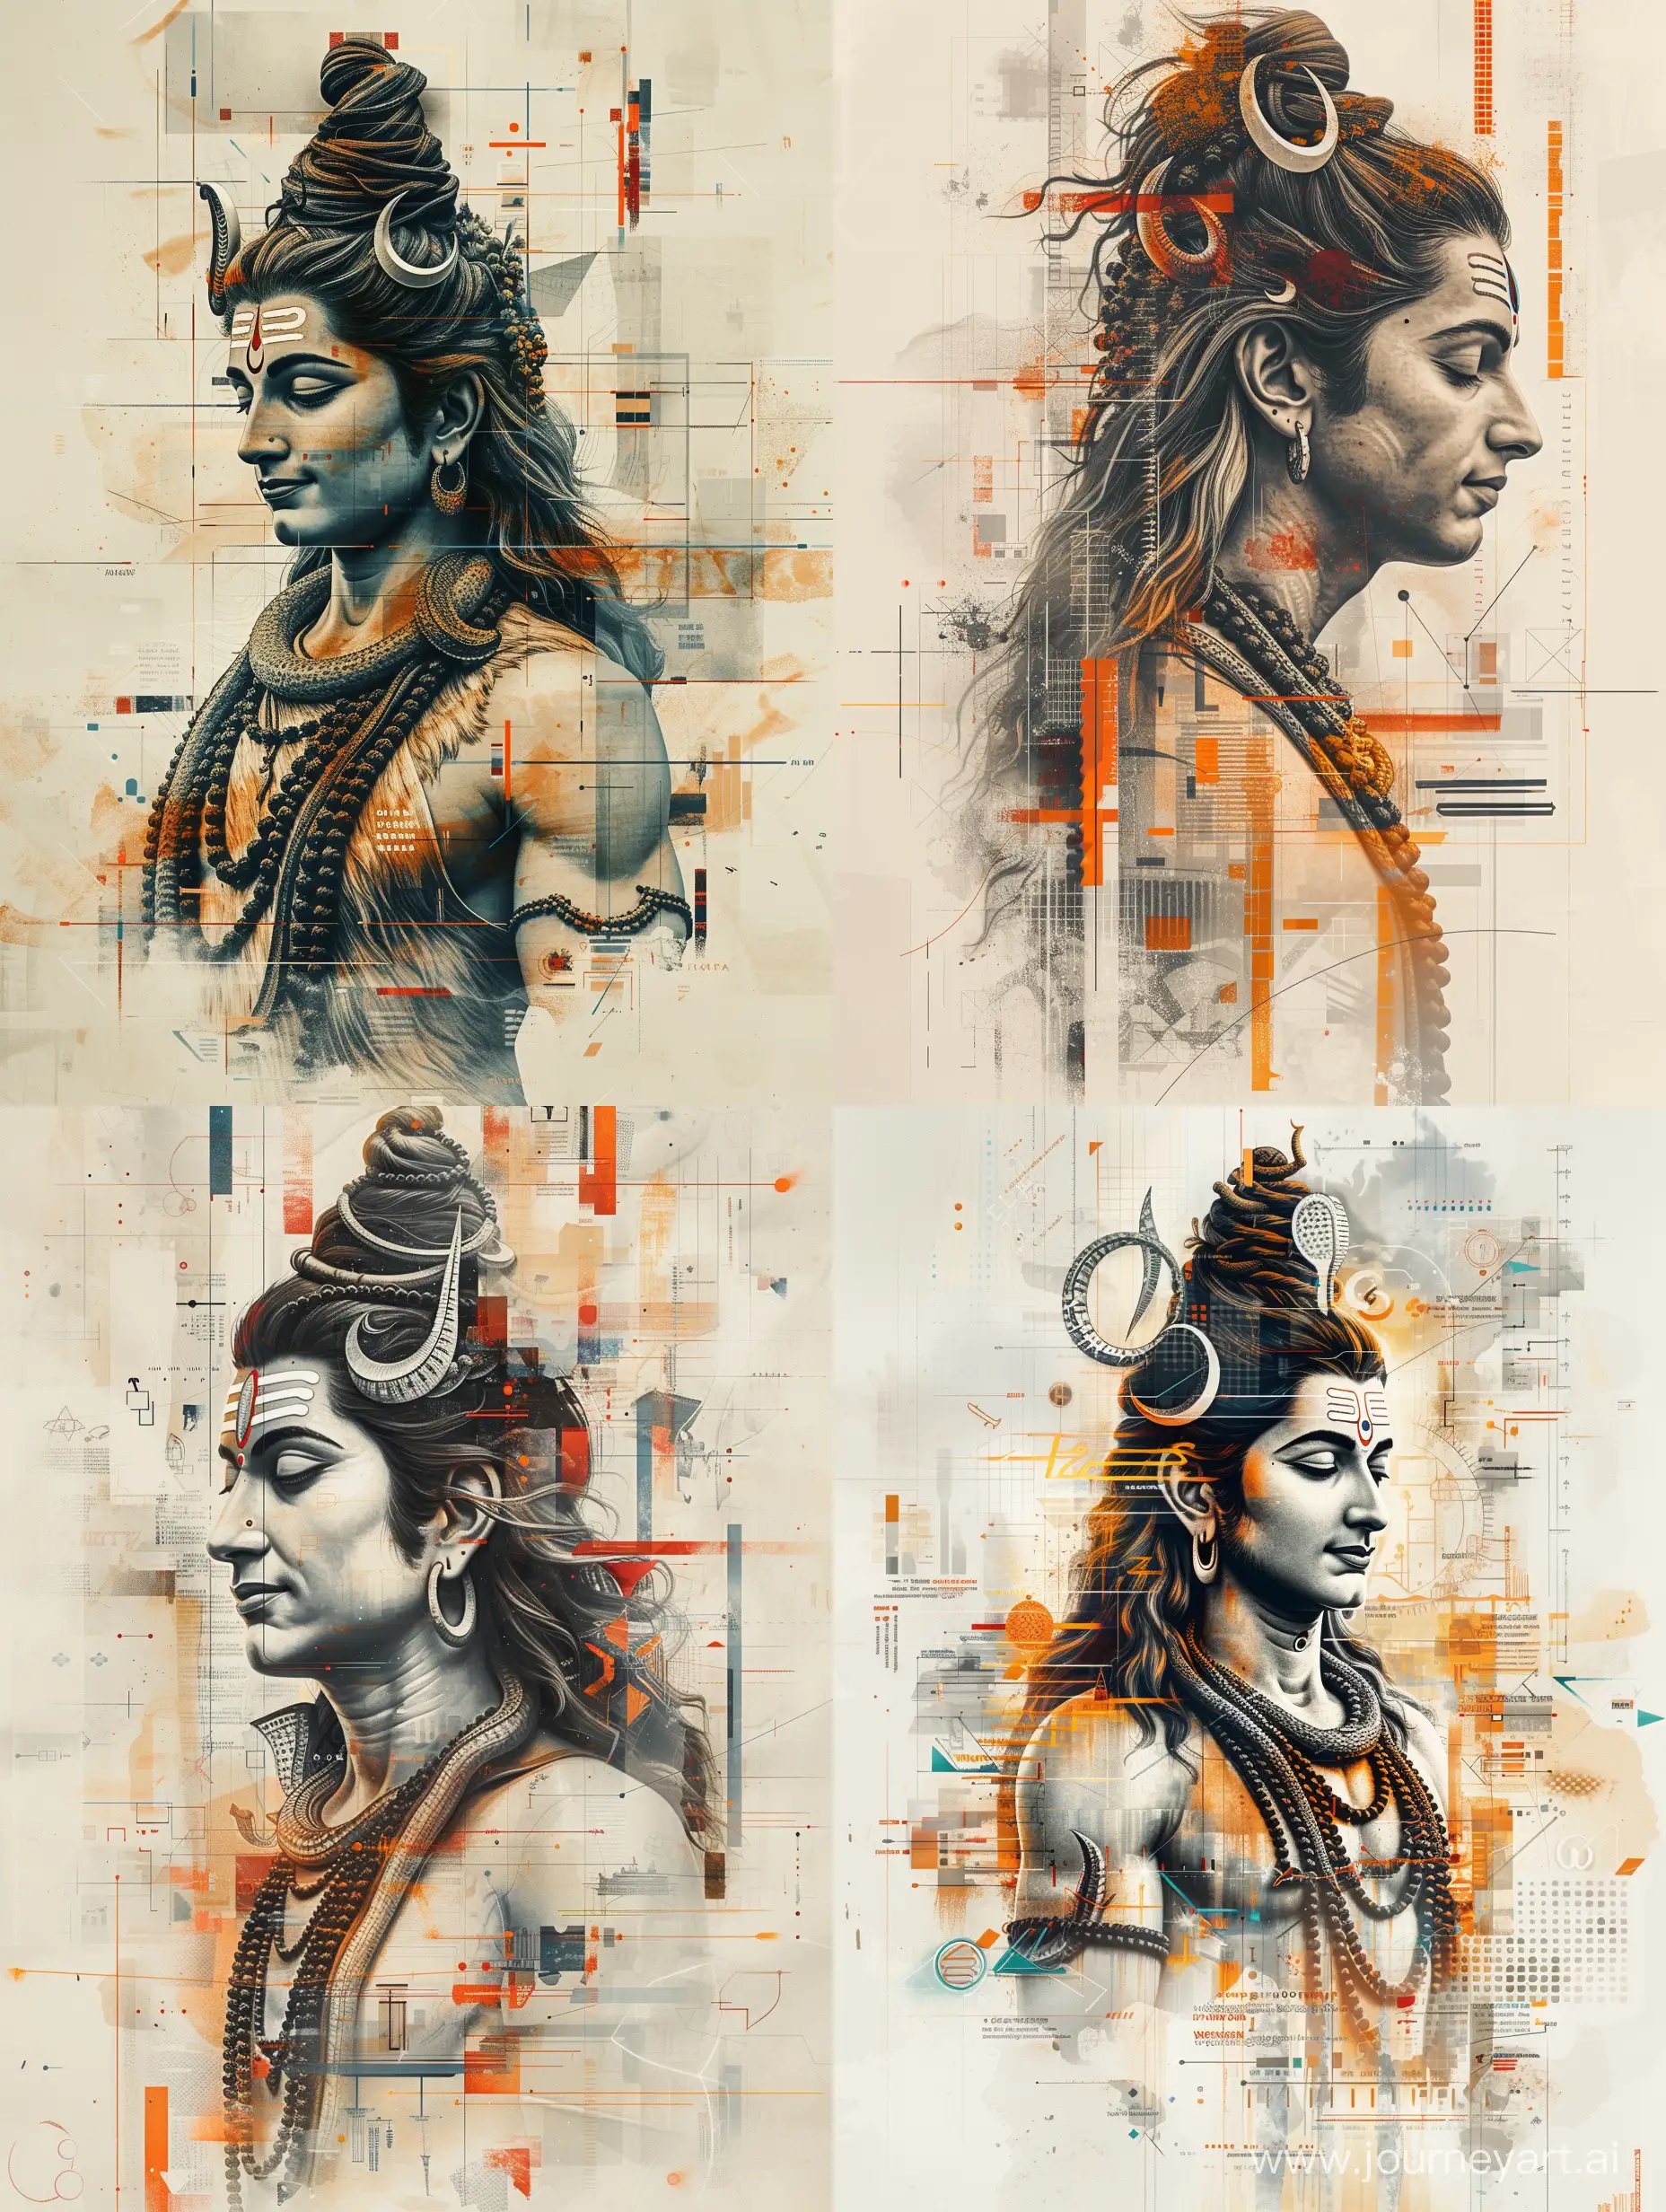 Captivating contemporary-style minimalist collage featuring Lord Shiva against a backdrop of sleek business elements. Utilize clean lines, bold shapes, and a restrained color palette to convey both the iconic stature of Lord Shiva and the dynamic, modern spirit of the business world. Integrate subtle symbols of commerce, technology, and innovation to seamlessly blend the historical and the contemporary. Your artwork should evoke a sense of balance between tradition and progress, showcasing Lord Shiva as a timeless symbol within the context of a sophisticated business environment.--ar 9:16 --stylize 250 --v 6